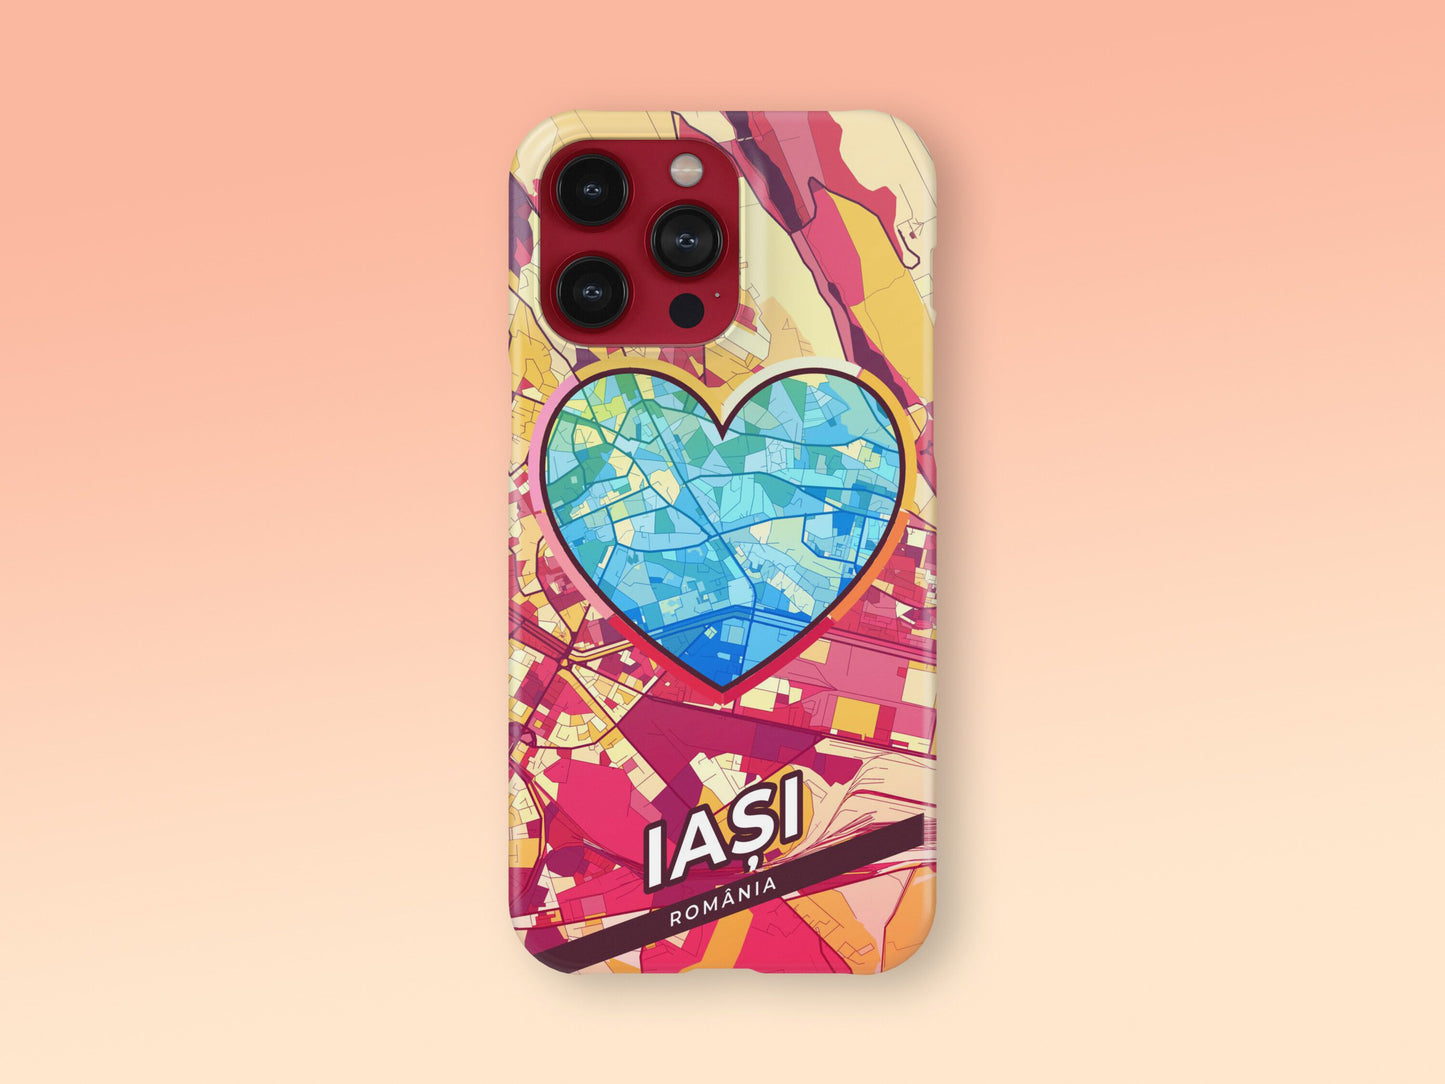 Iași Romania slim phone case with colorful icon. Birthday, wedding or housewarming gift. Couple match cases. 2